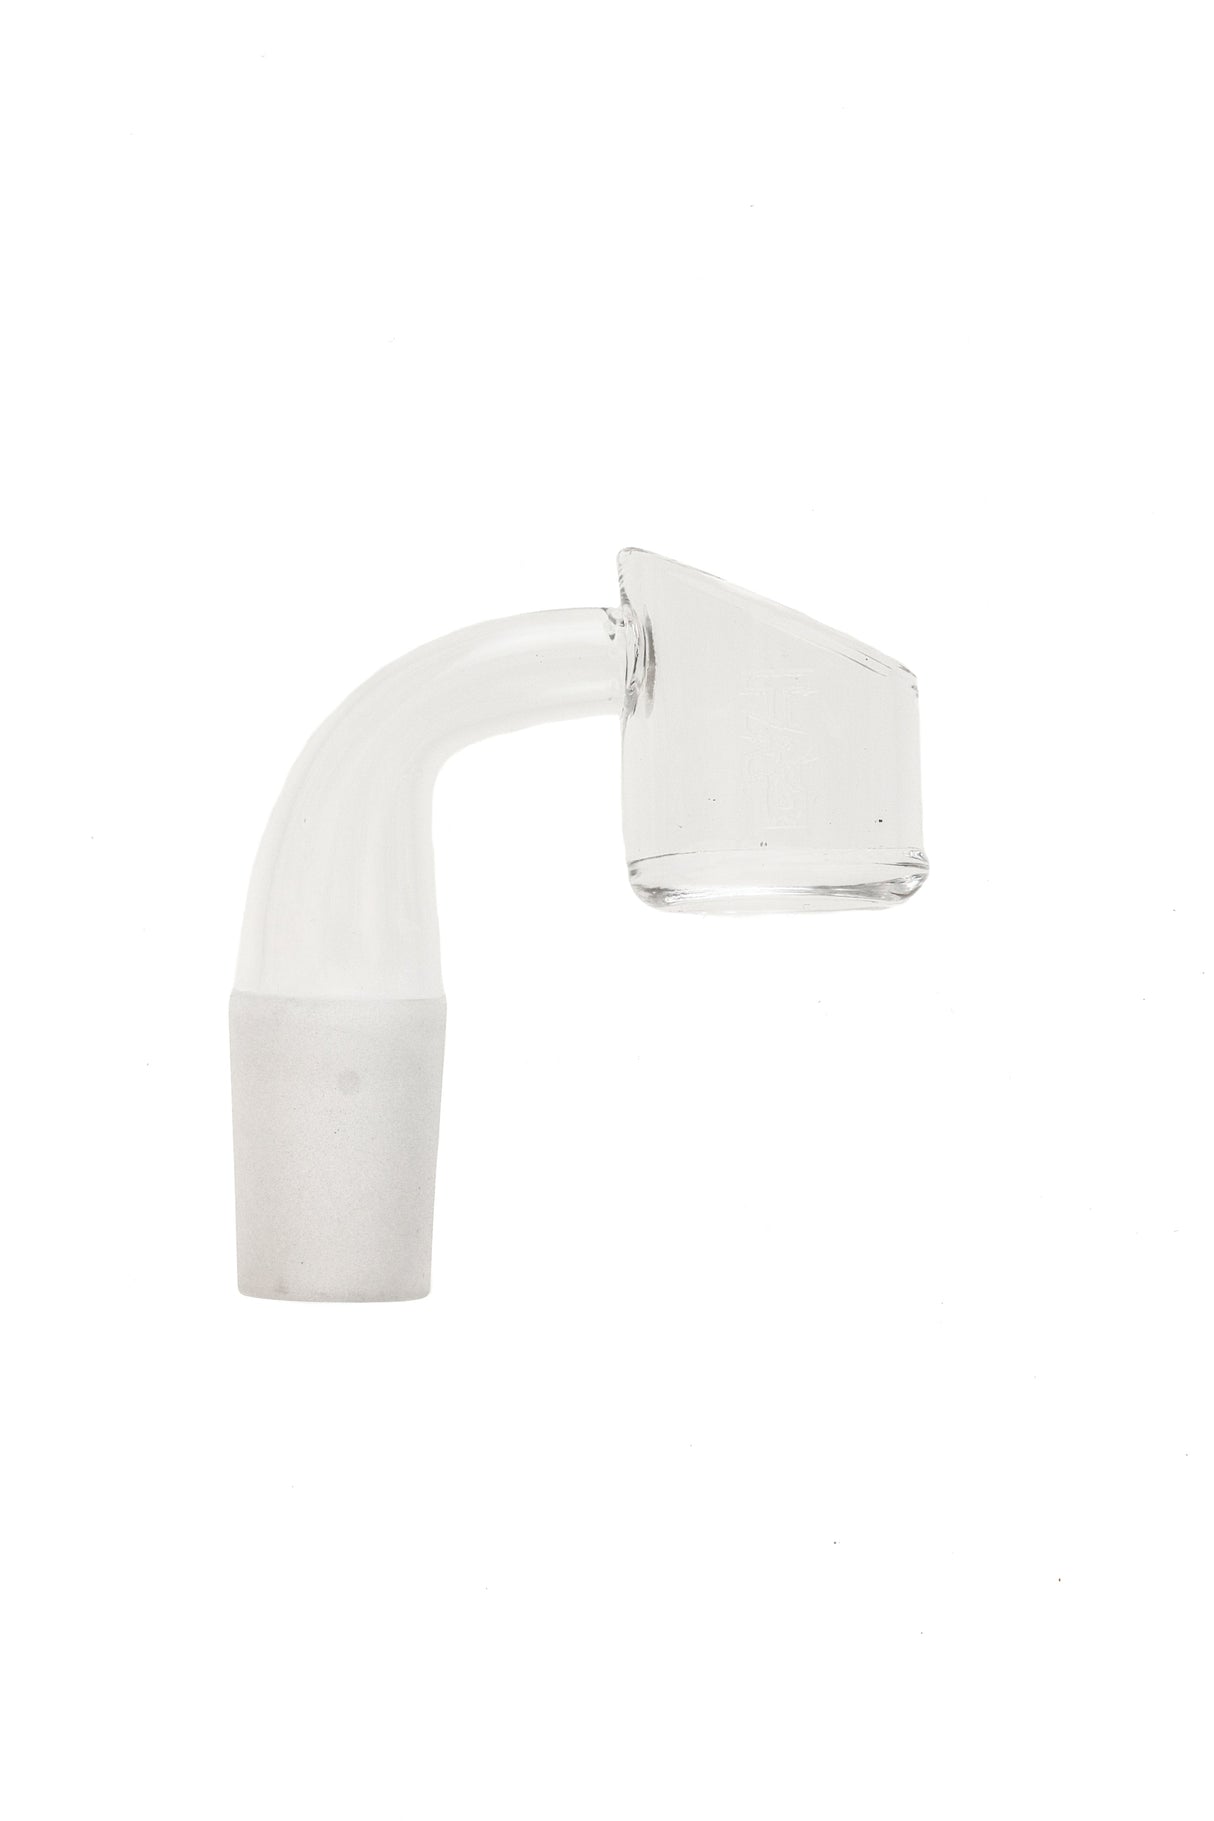 TAG Quartz Banger with High Air Flow, 25x2MM-4MM Thick, Side View on White Background